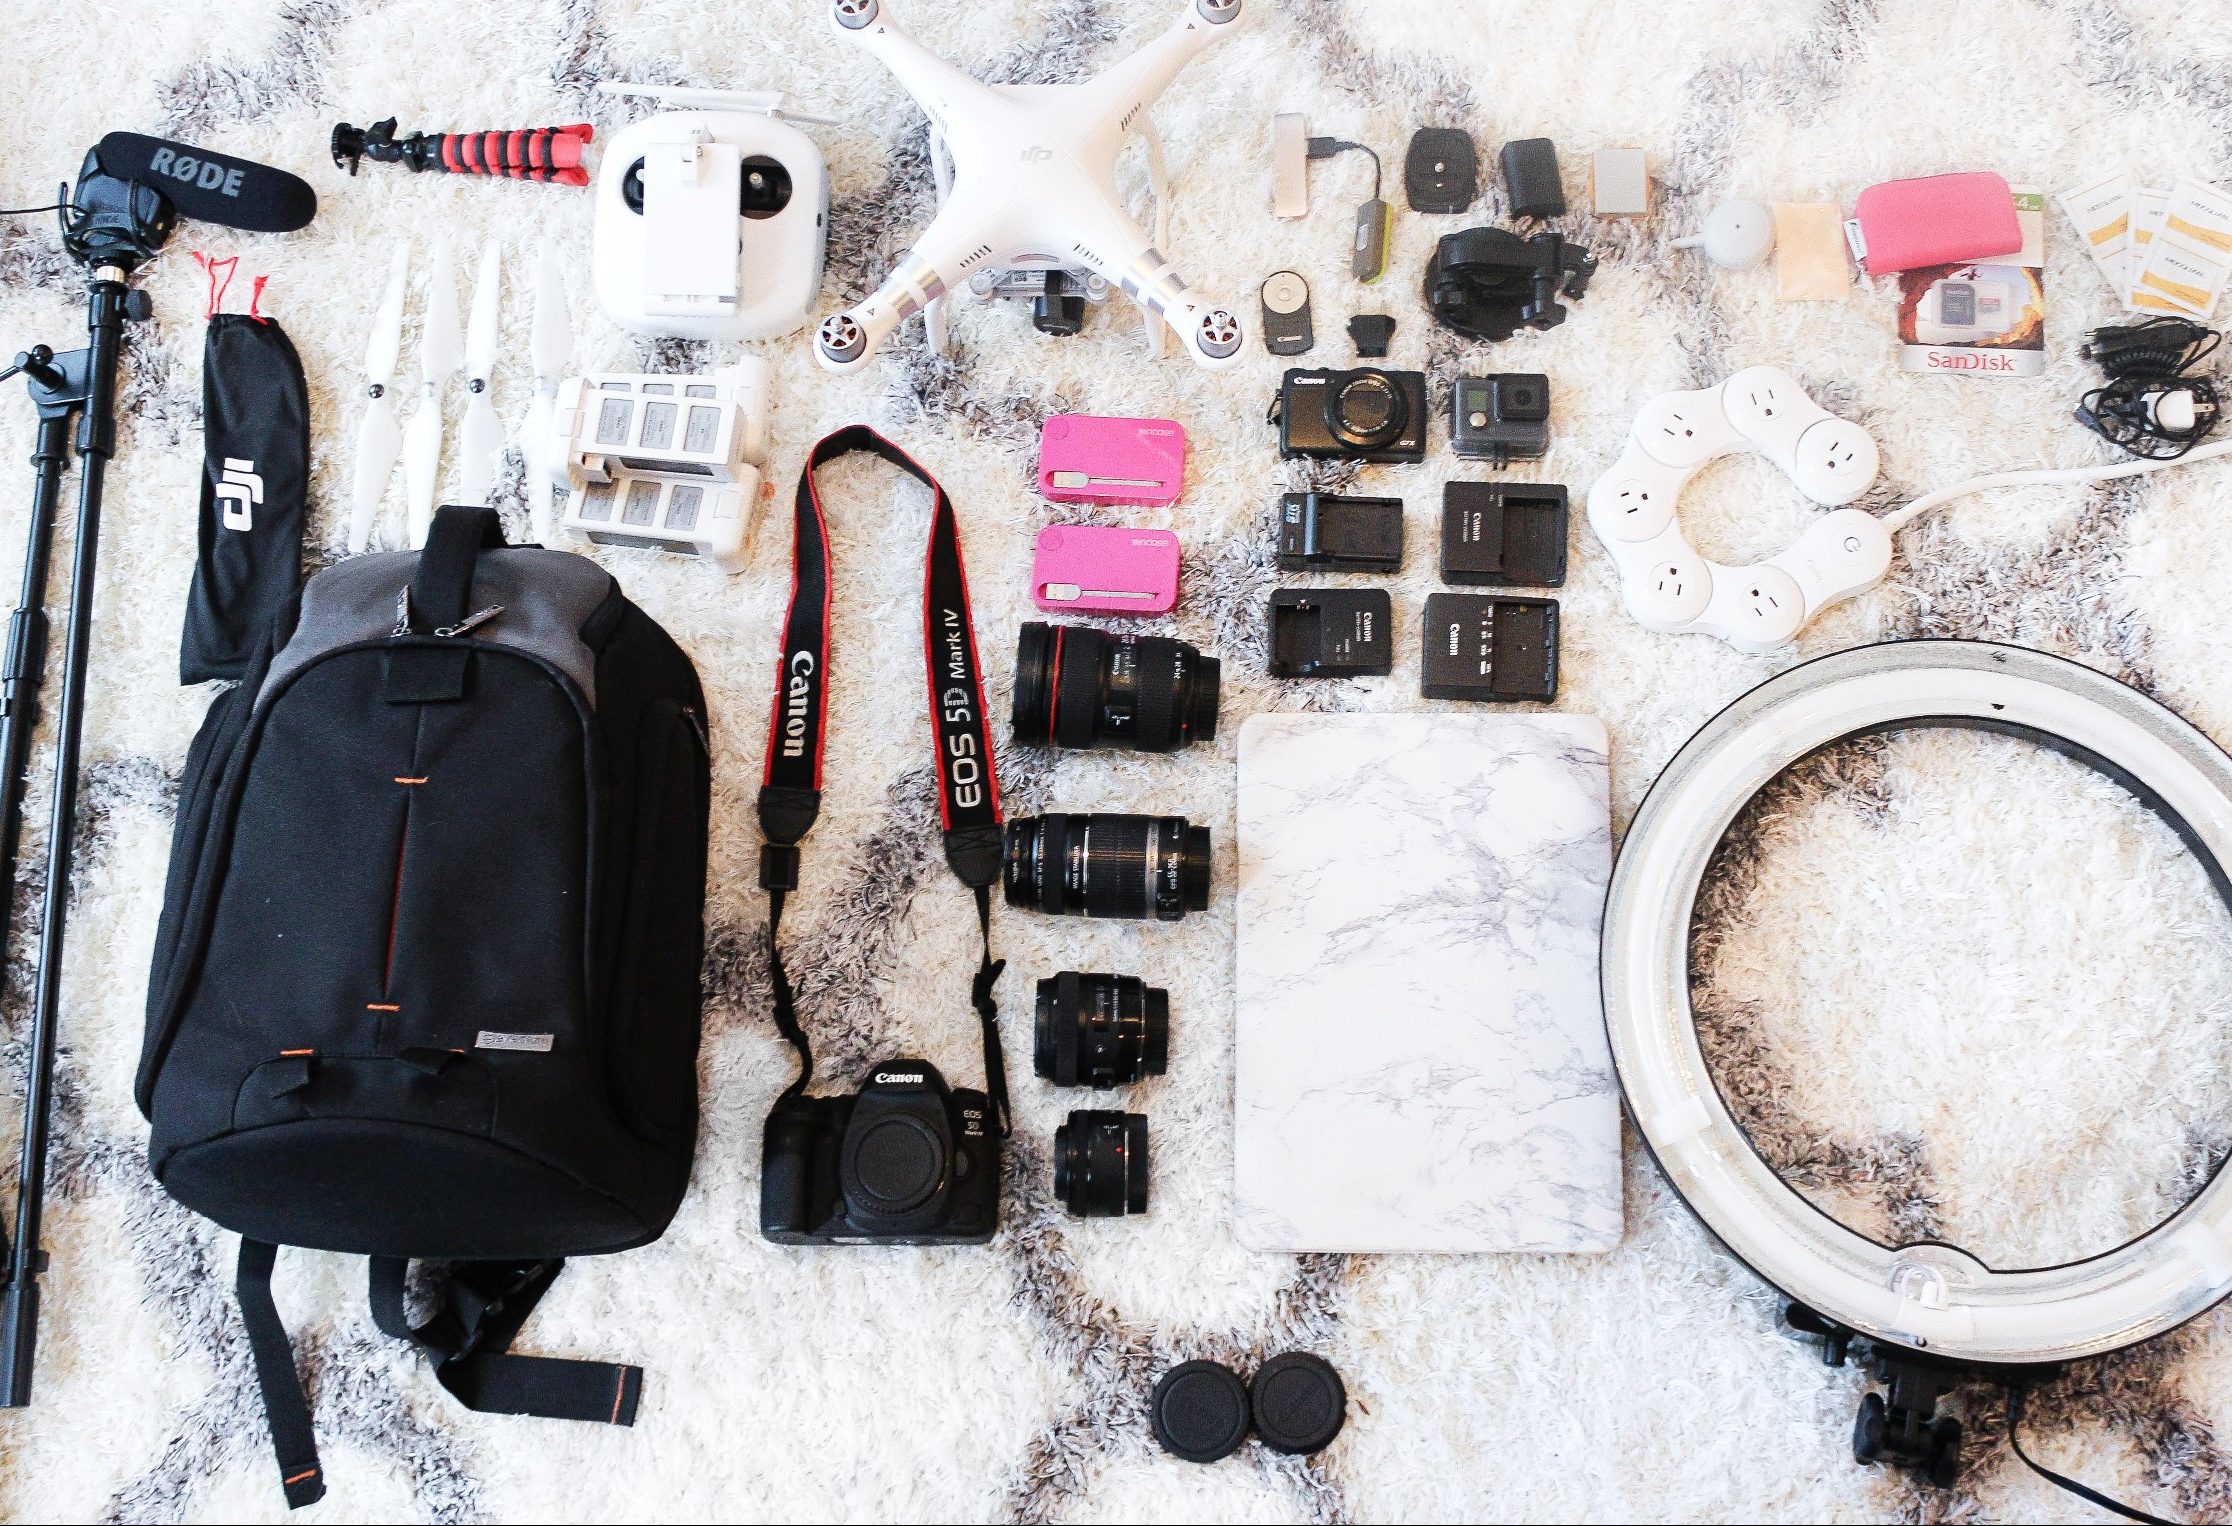 What's In My Camera Bag! As a blogger, one of the most important parts of creating contents is beautiful photos and videos! I love researching camera gear and I have collected quite a bit. Canon 5D Mark IV and accessories! By Lauren Lindmark on dailydoseofcharm.com daily dose of charm